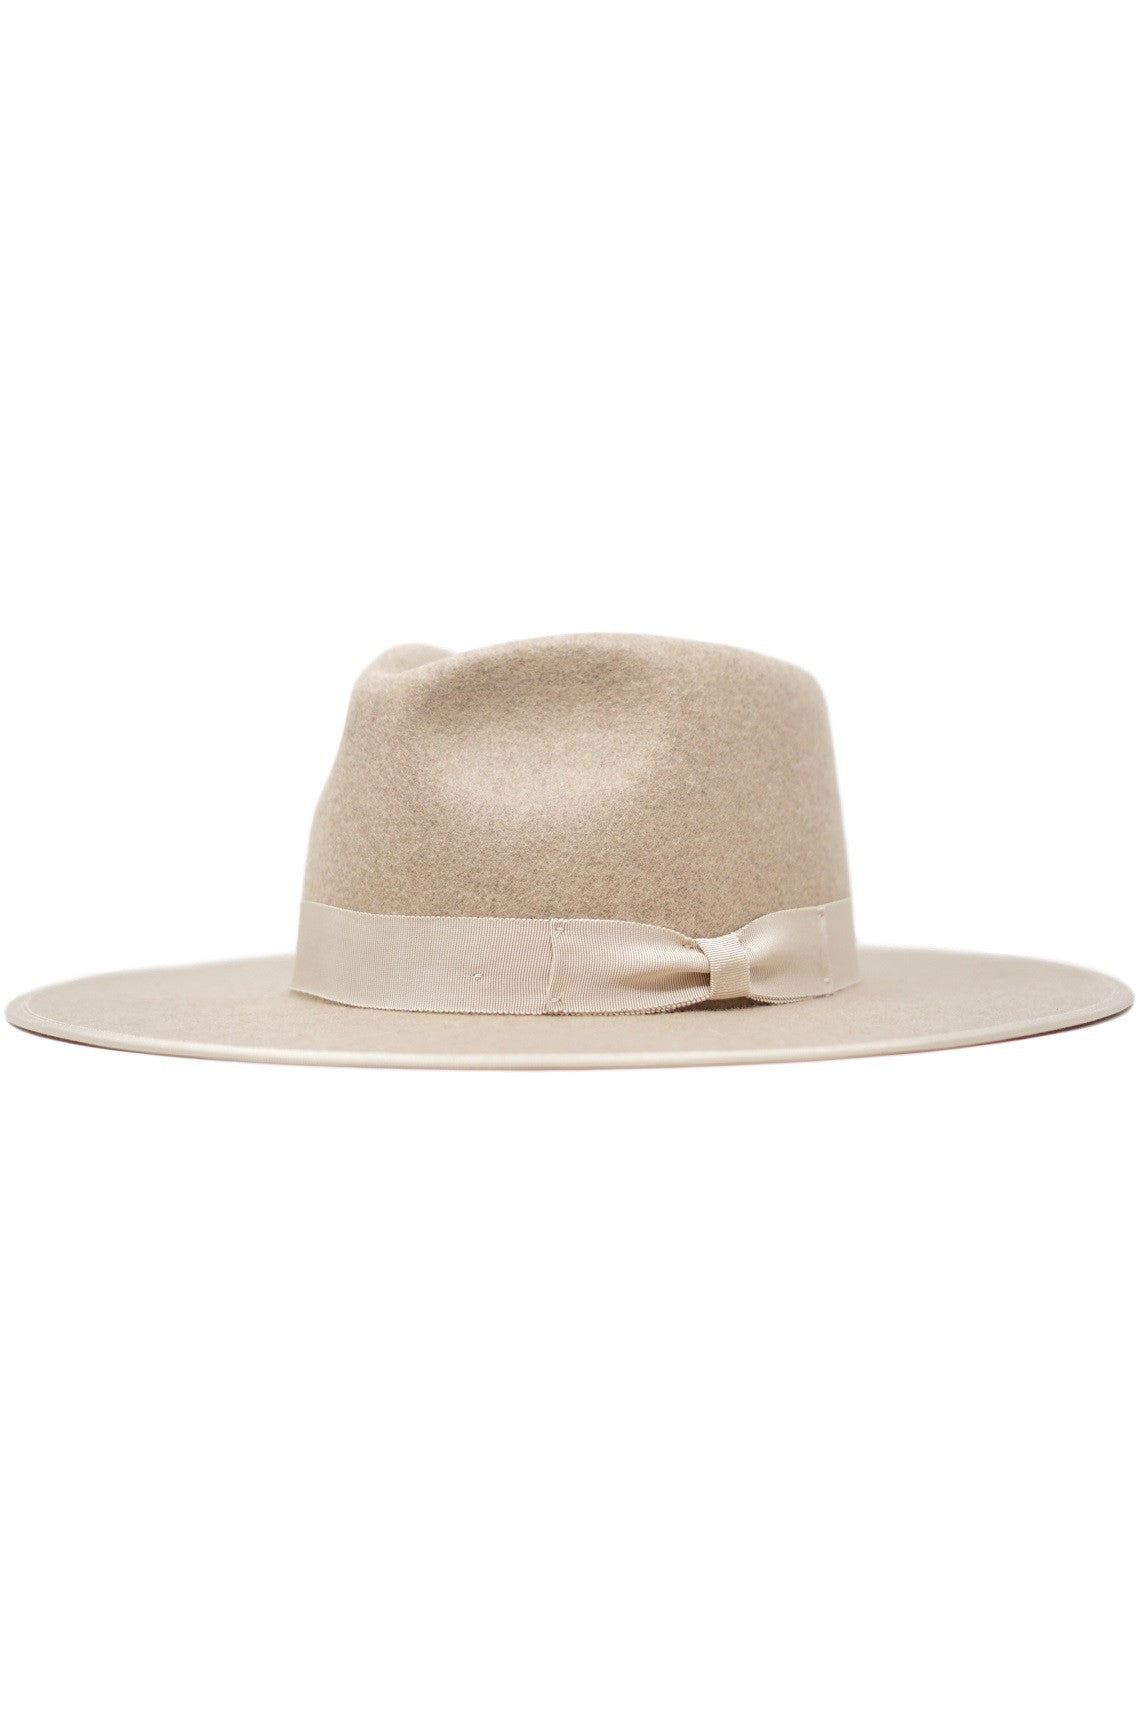 Olive & Pique Wool Felt Rancher Hat – The Society Marketplace